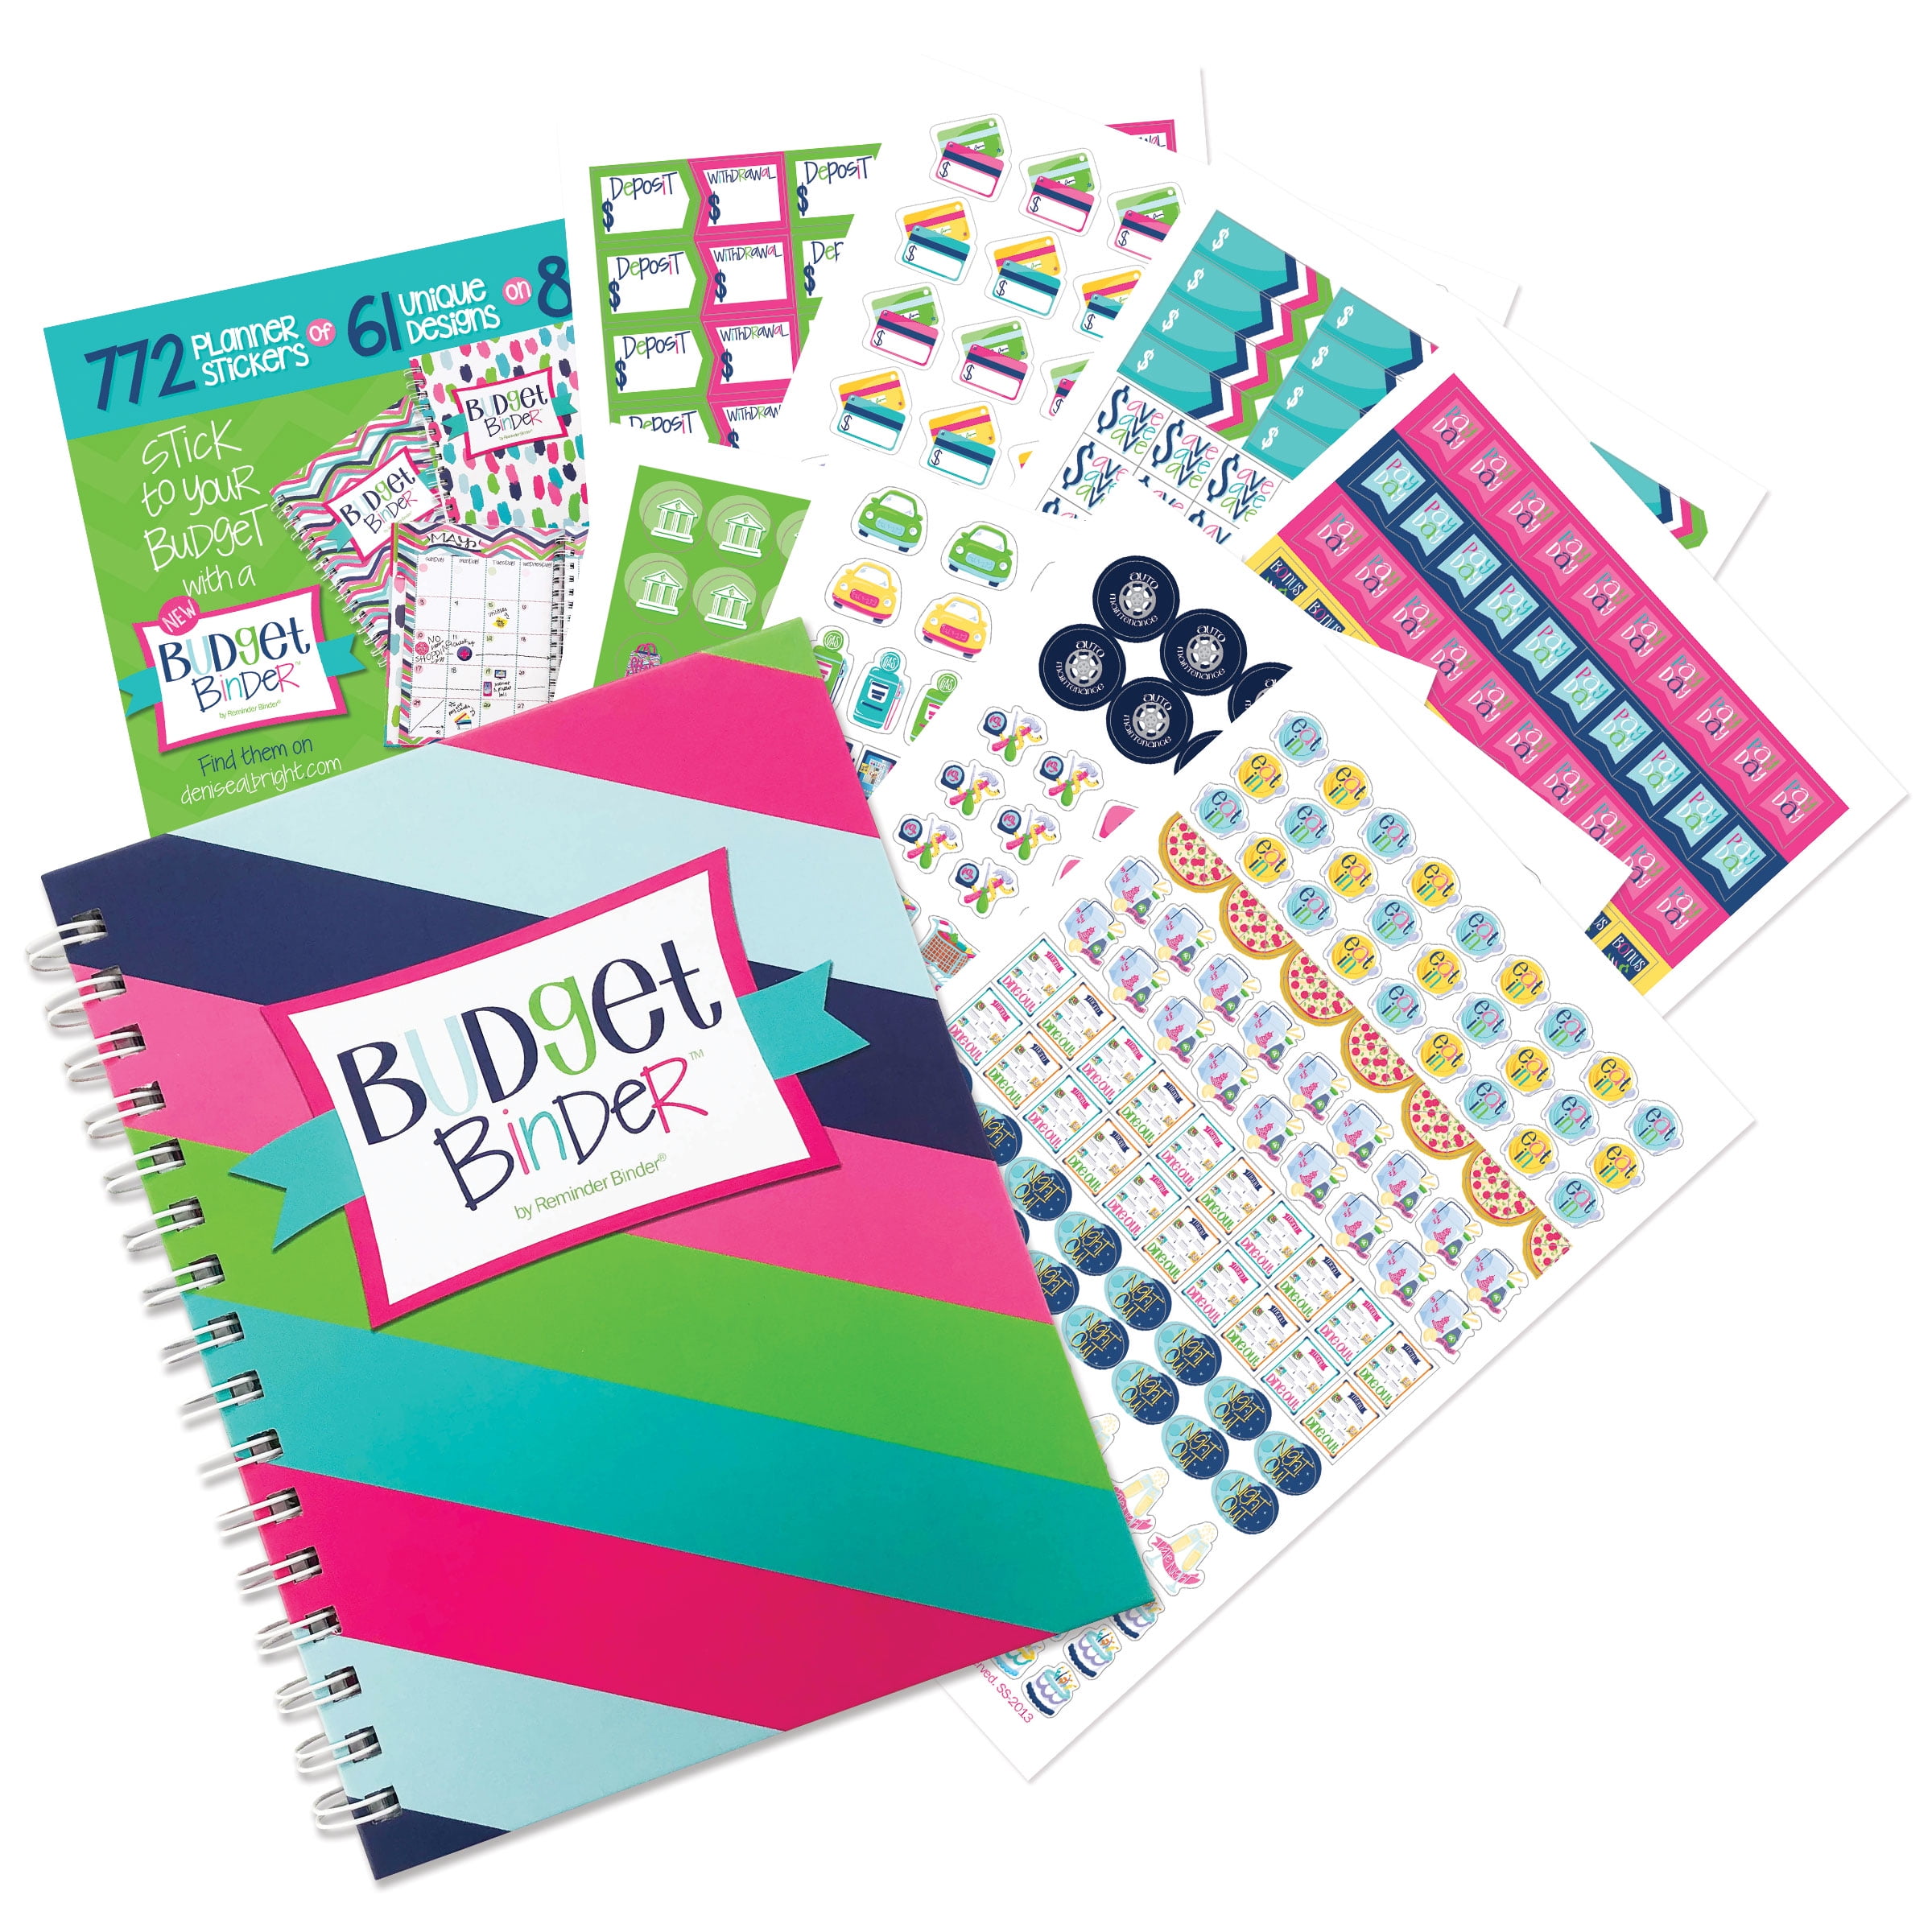 31 Sheets/1748 Planner Stickers, Calendar Stickers for Adults Planner  Journal Stickers for Budget Financial Planner